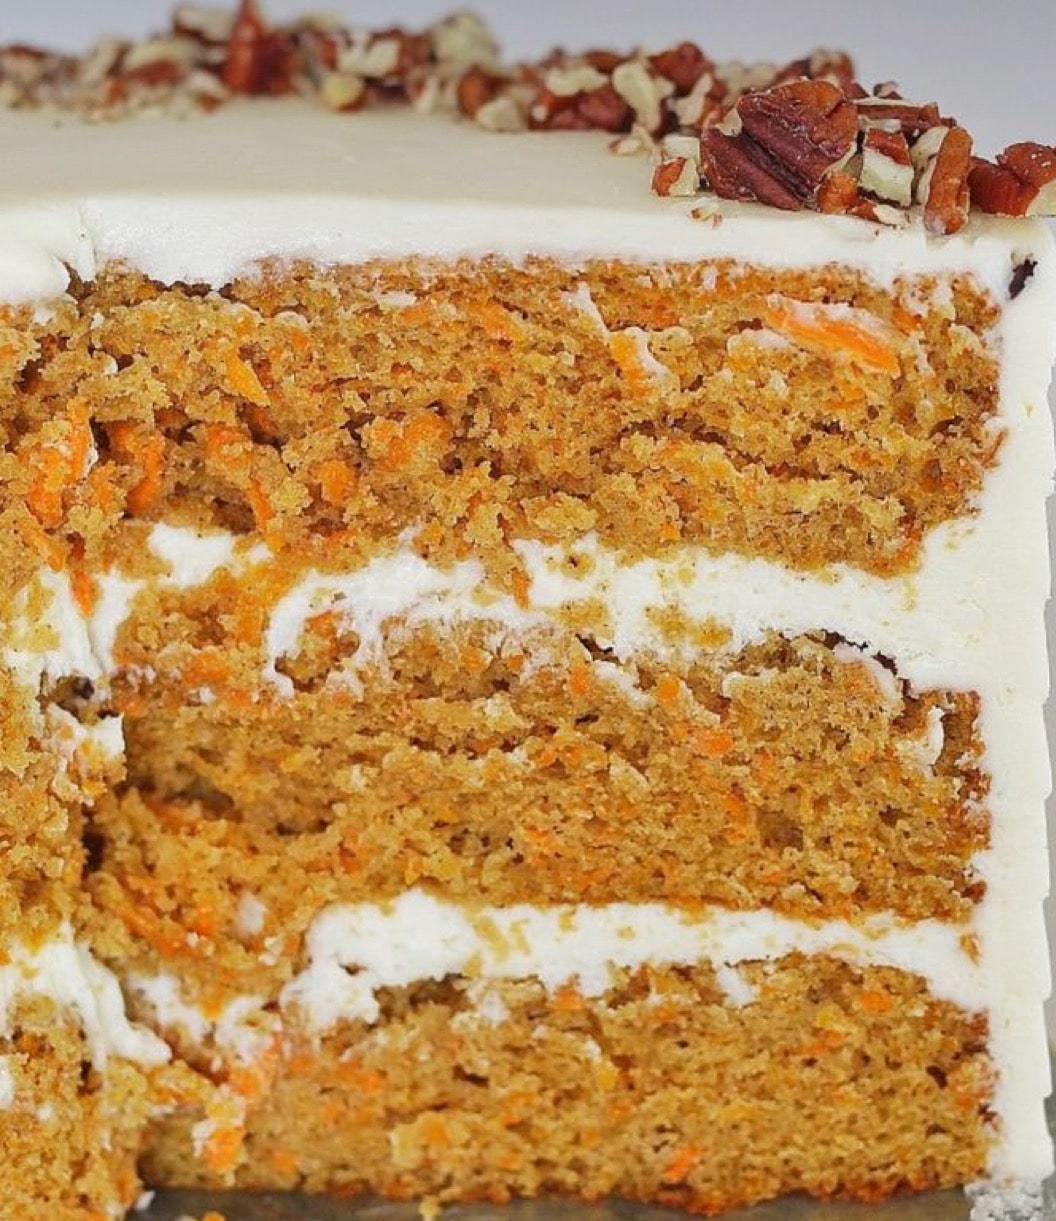 Hands-on Carrot Cake Class with Susan and Rebecca | March 23rd | 10 AM